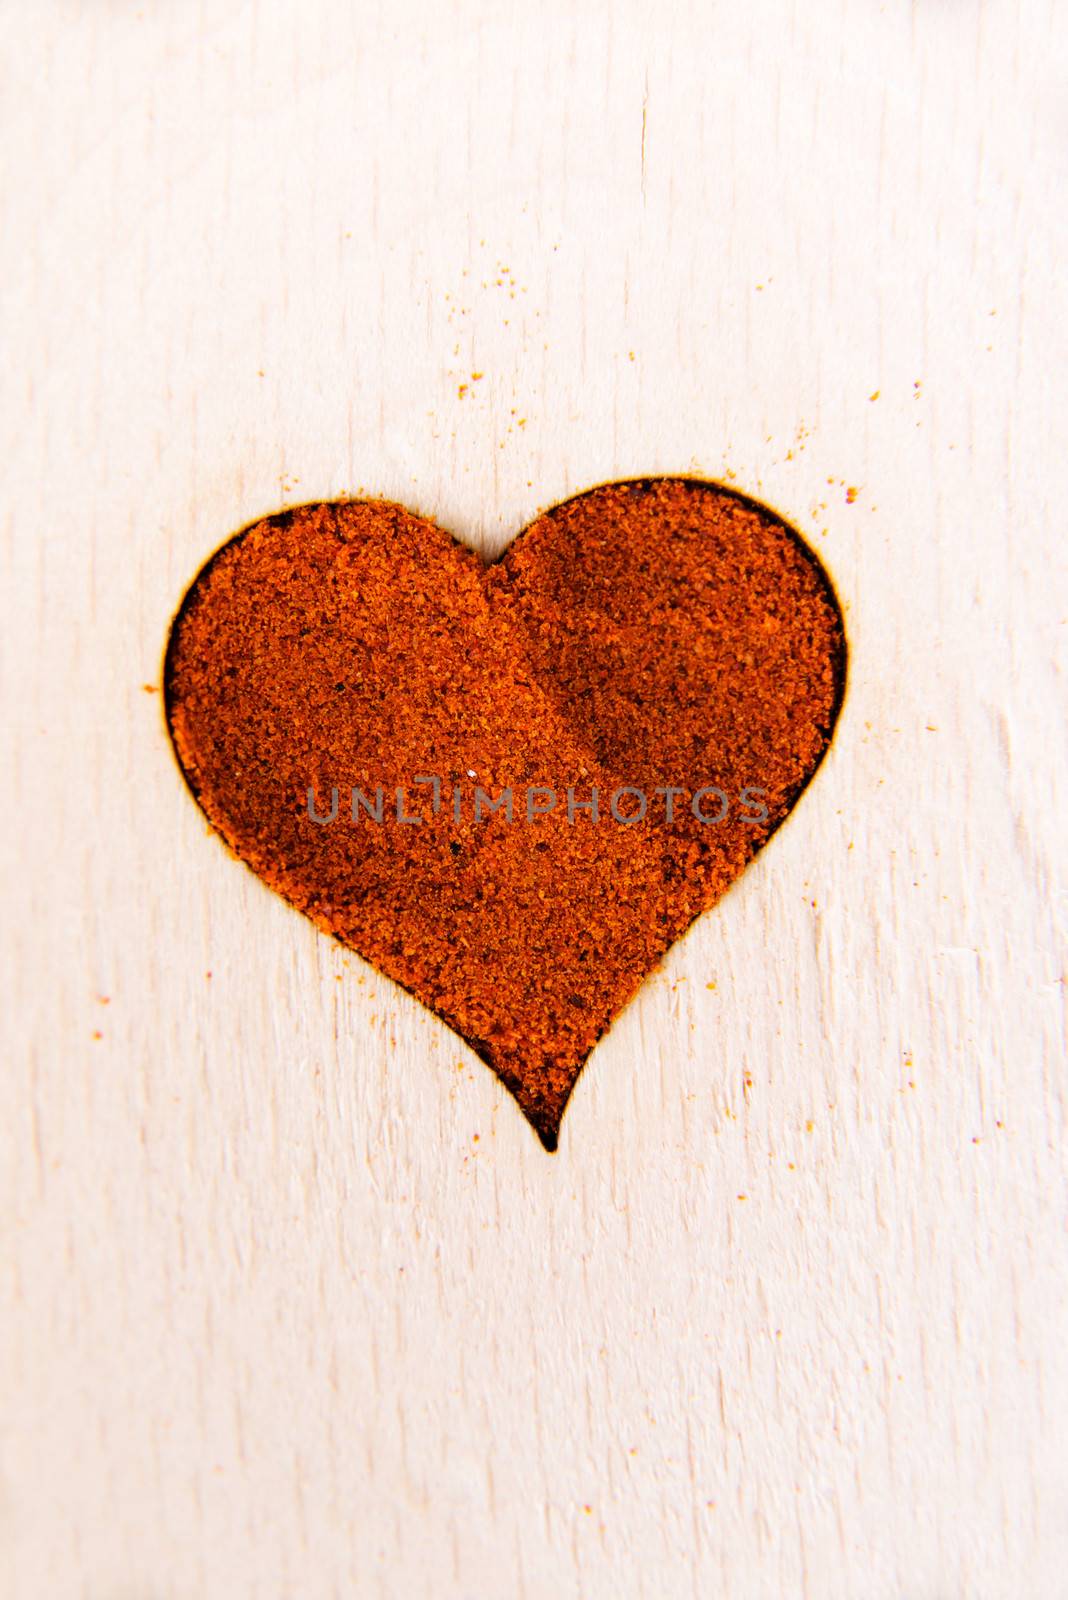 Heart shape made from spice on a wooden spoon. Composition.